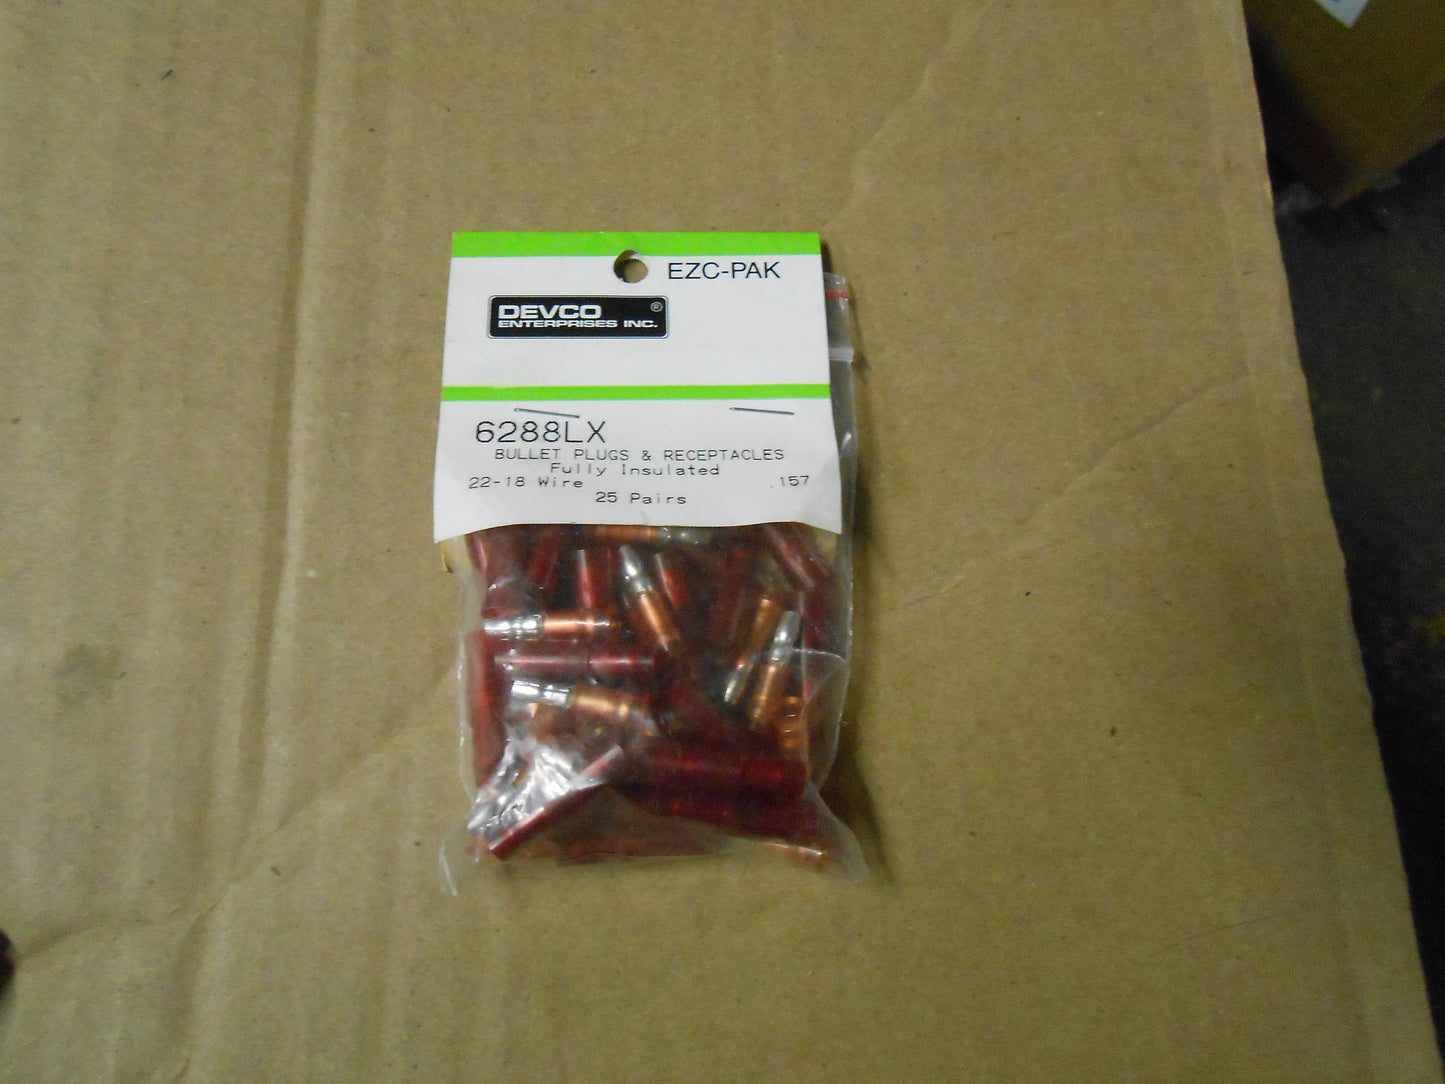 BULLET PLUGS WITH RECEPTACLES,    SOLD AS 25 PAIR PER PACKAGE